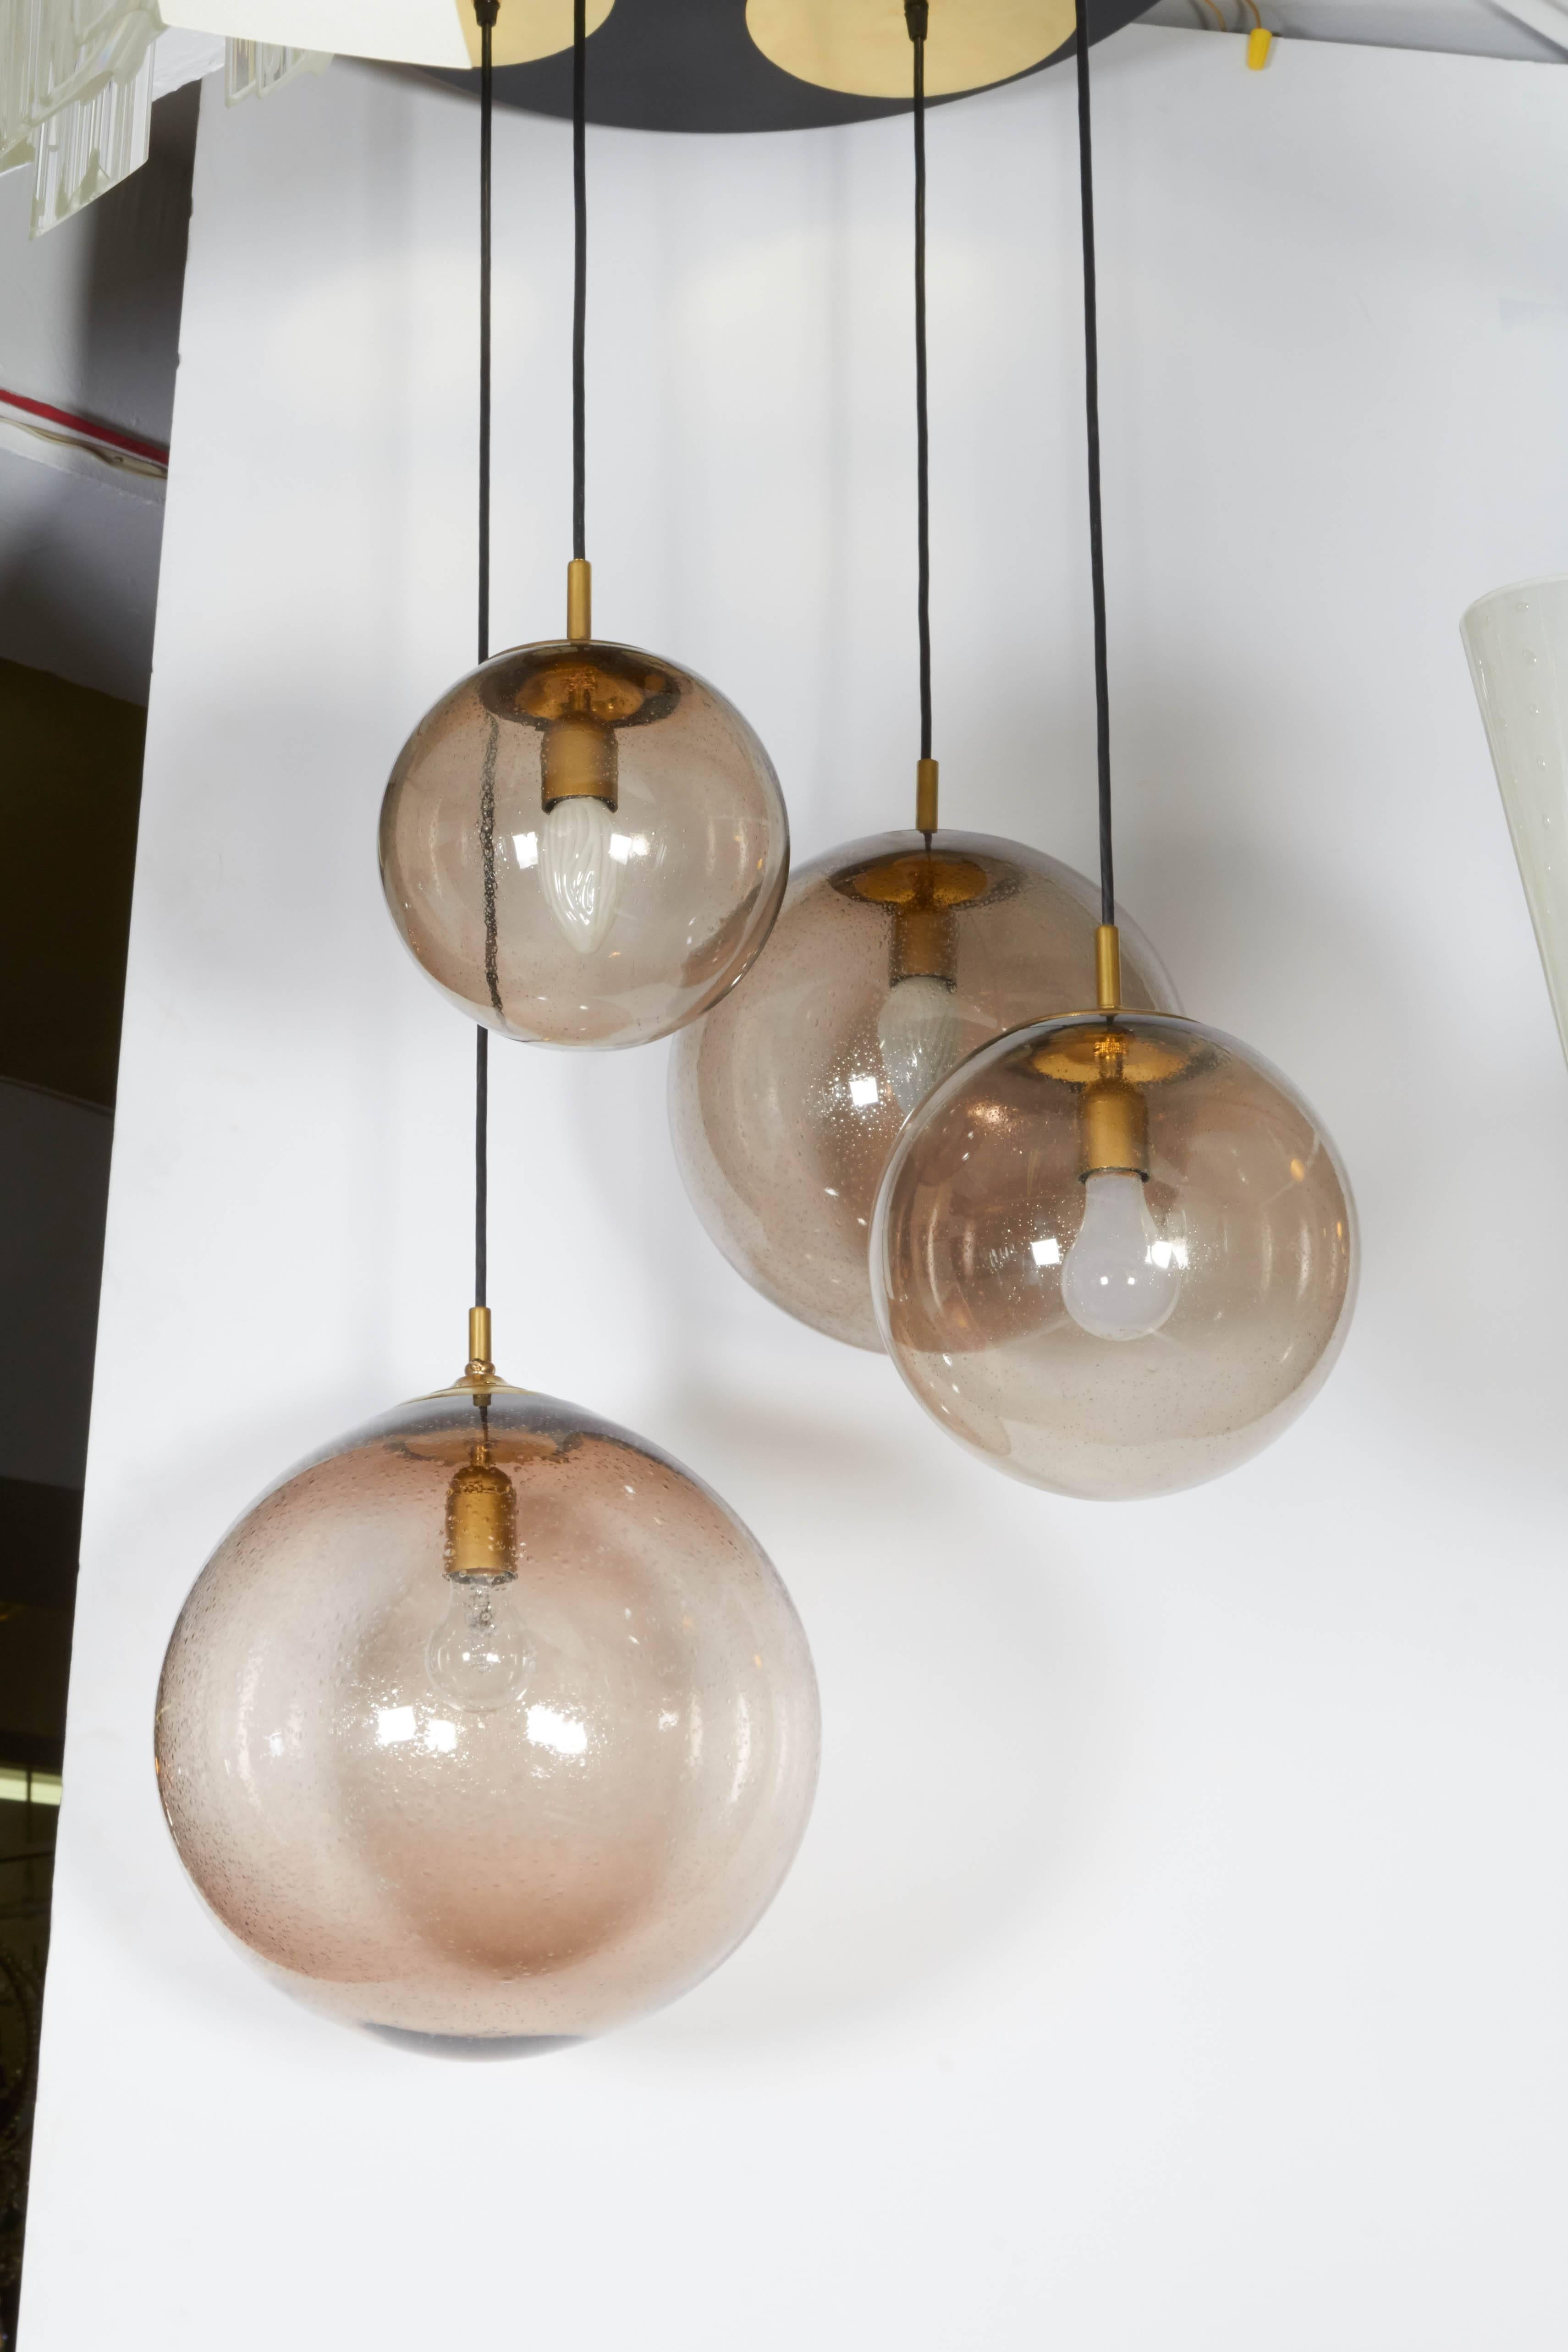 This highly modern light fixture, produced circa 1965 by RAAK of Amsterdam, Netherlands, is comprised of four hanging pendants, each with smoked glass globes of varying sizes, suspended at different lengths from a black ceiling plate with brass